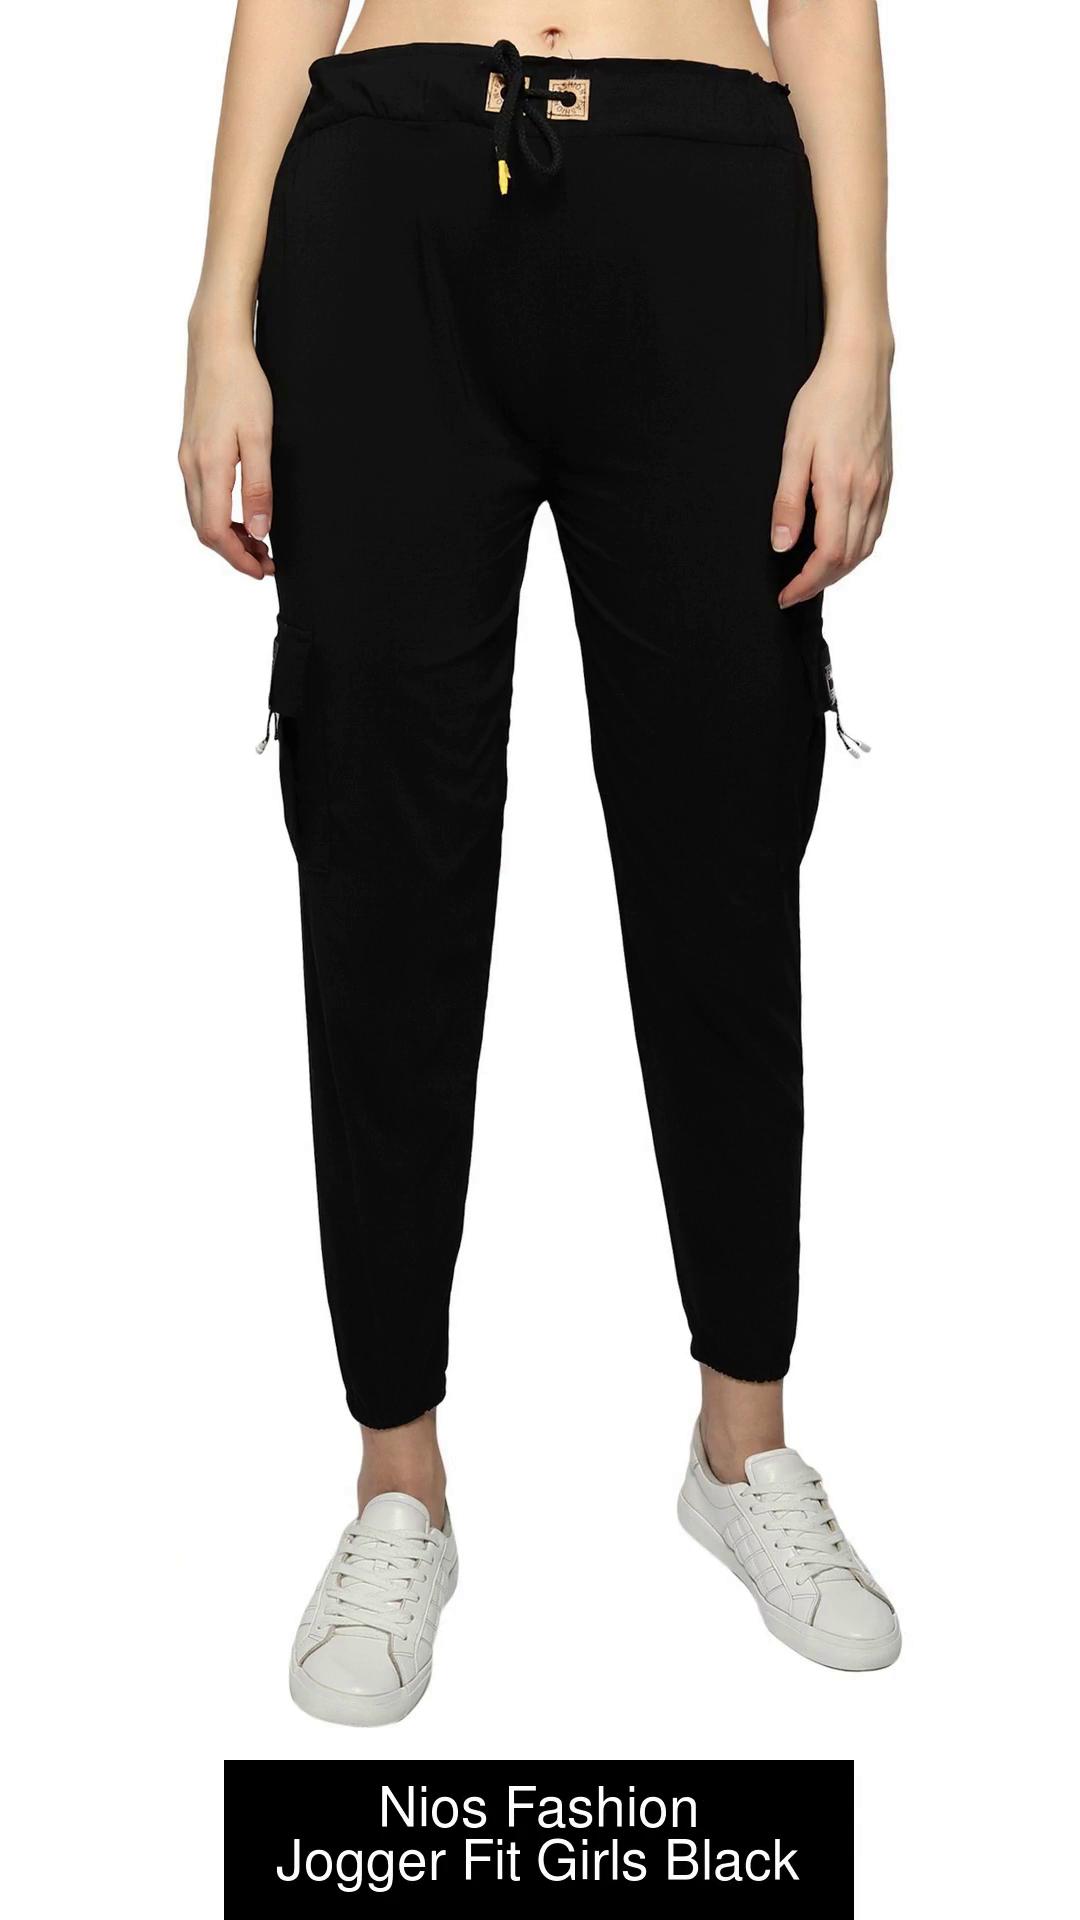 Nios Fashion Jogger Fit Girls Black Jeans - Buy Nios Fashion Jogger Fit  Girls Black Jeans Online at Best Prices in India